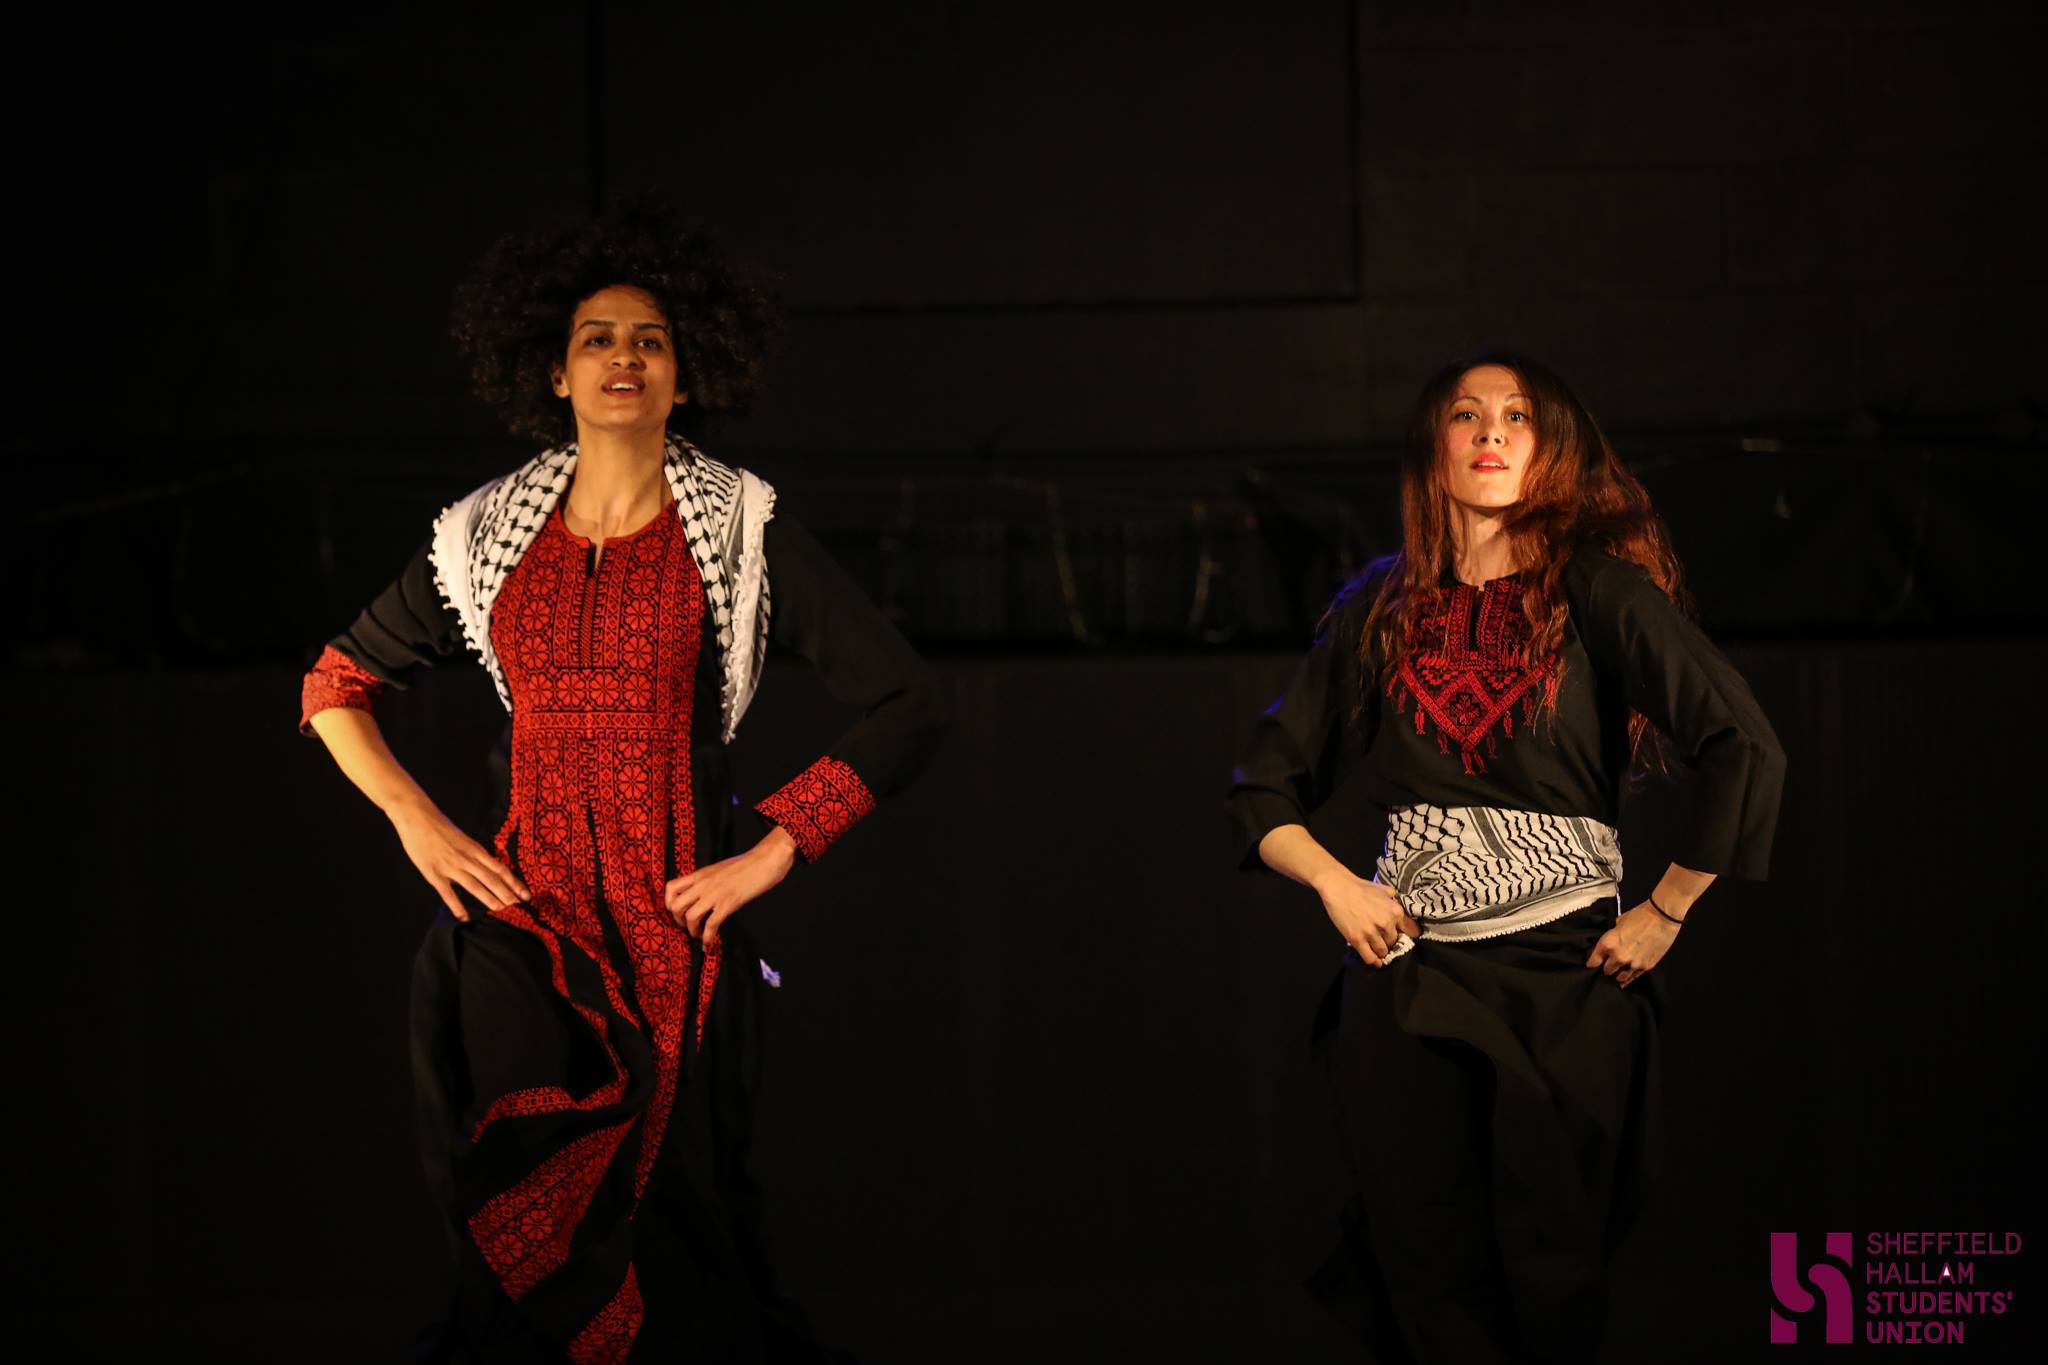 Breaking the Occupation of the Mind - Arts & Culture in Palestine